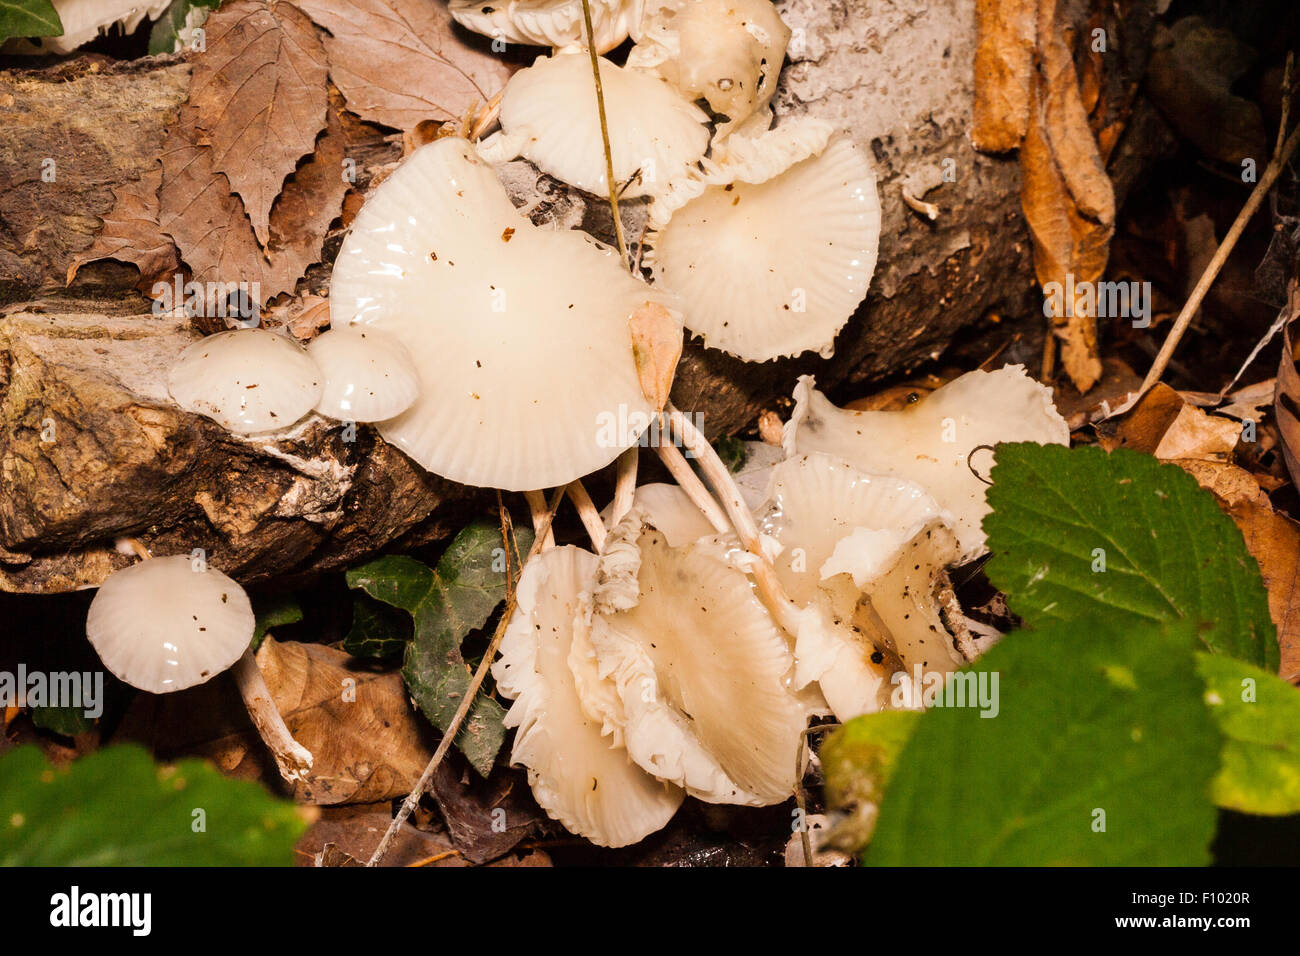 Macro shot of light brown, cream coloured shiny toadstools growing on side of fallen tree branch. Porcellain Fungus, Oudemansiella mucida. Stock Photo